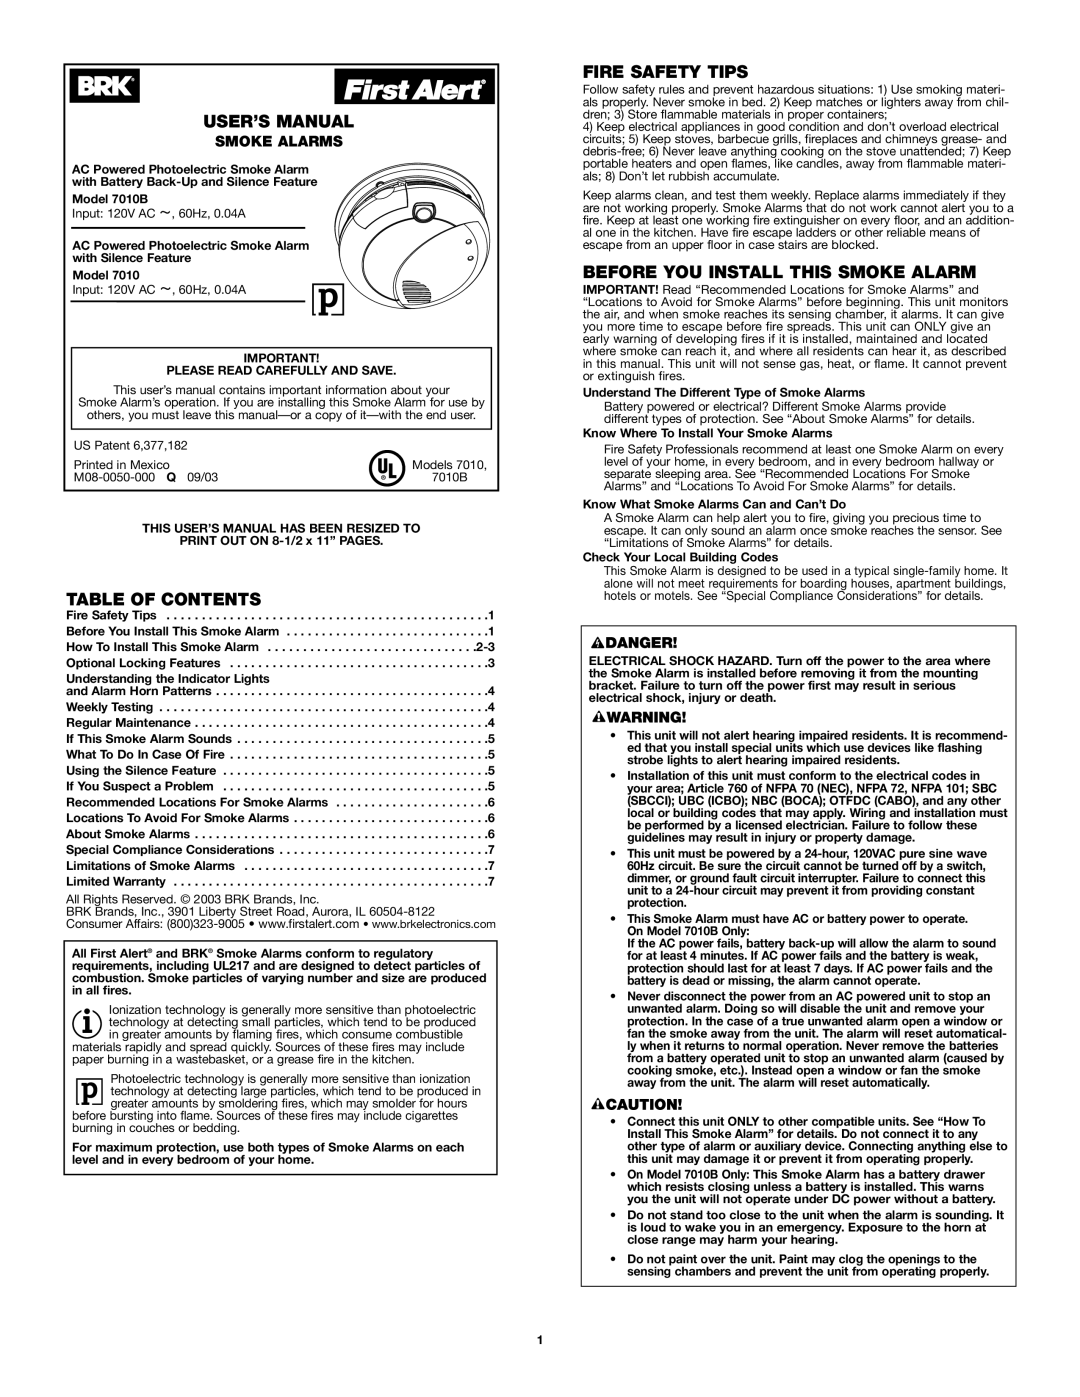 BRK electronic 7010 user manual User’S Manual, Table Of Contents, Fire Safety Tips, Before You Install This Smoke Alarm 